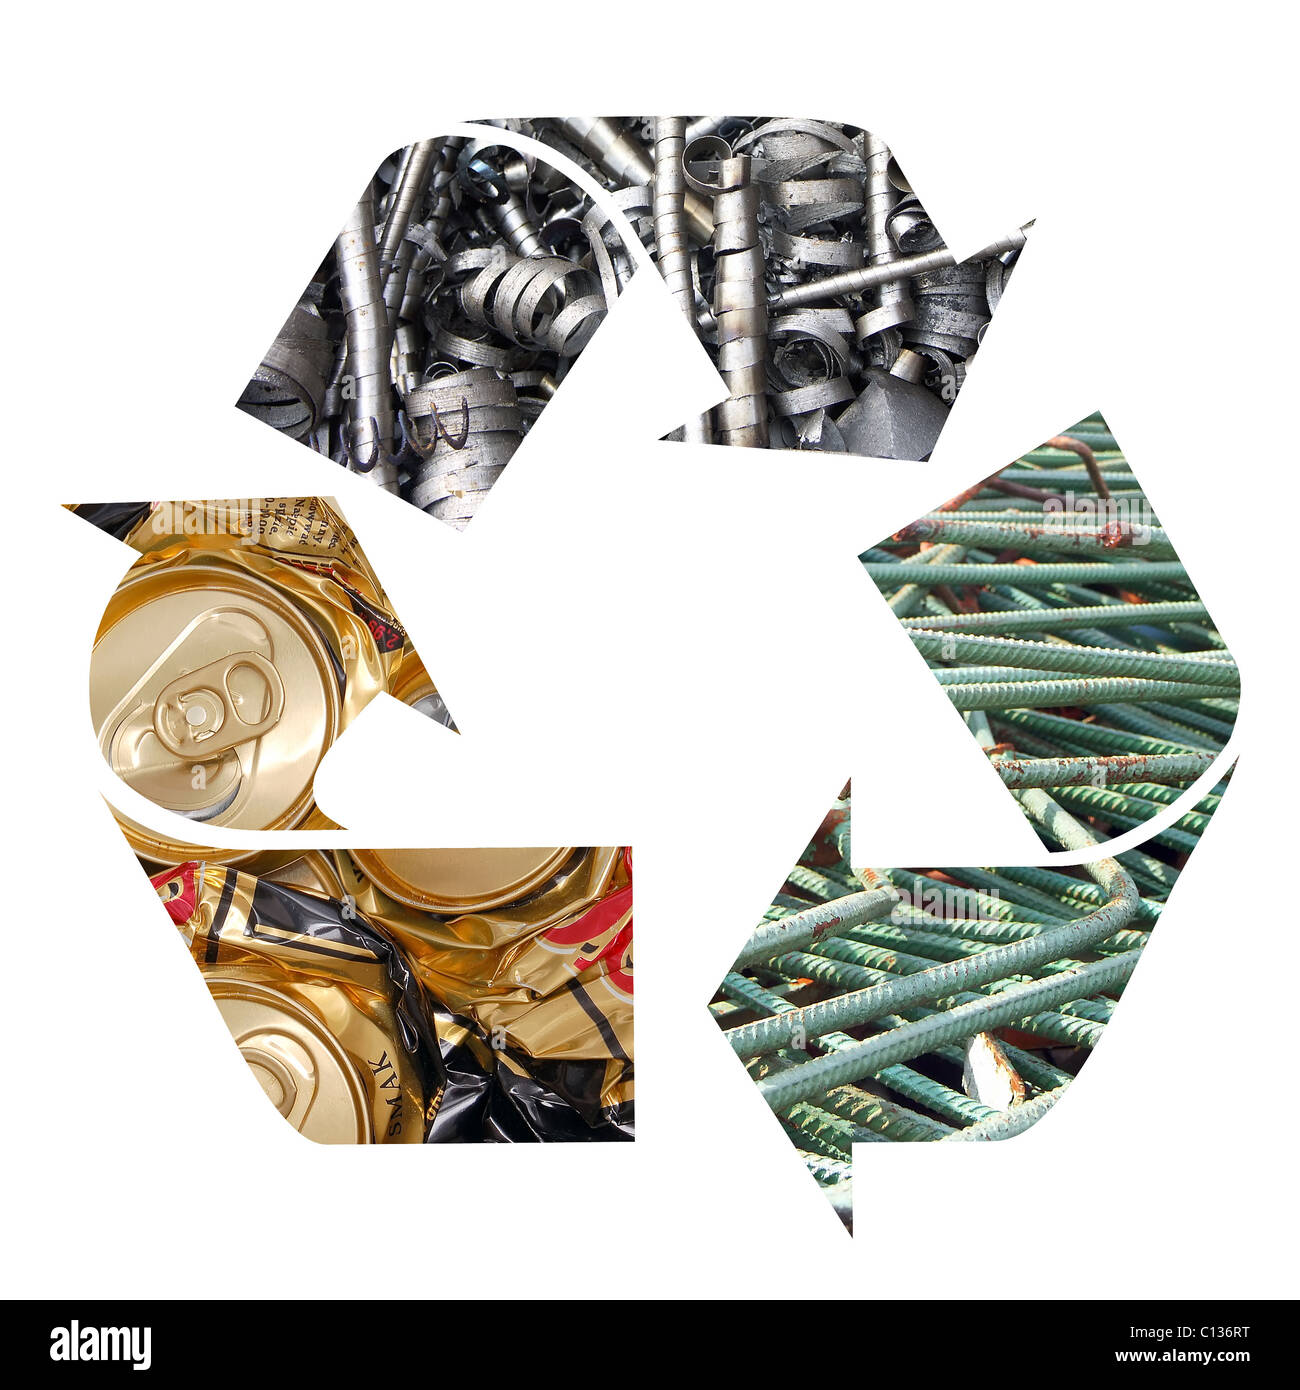 Trois touches metal recycling symbol over white background Banque D'Images